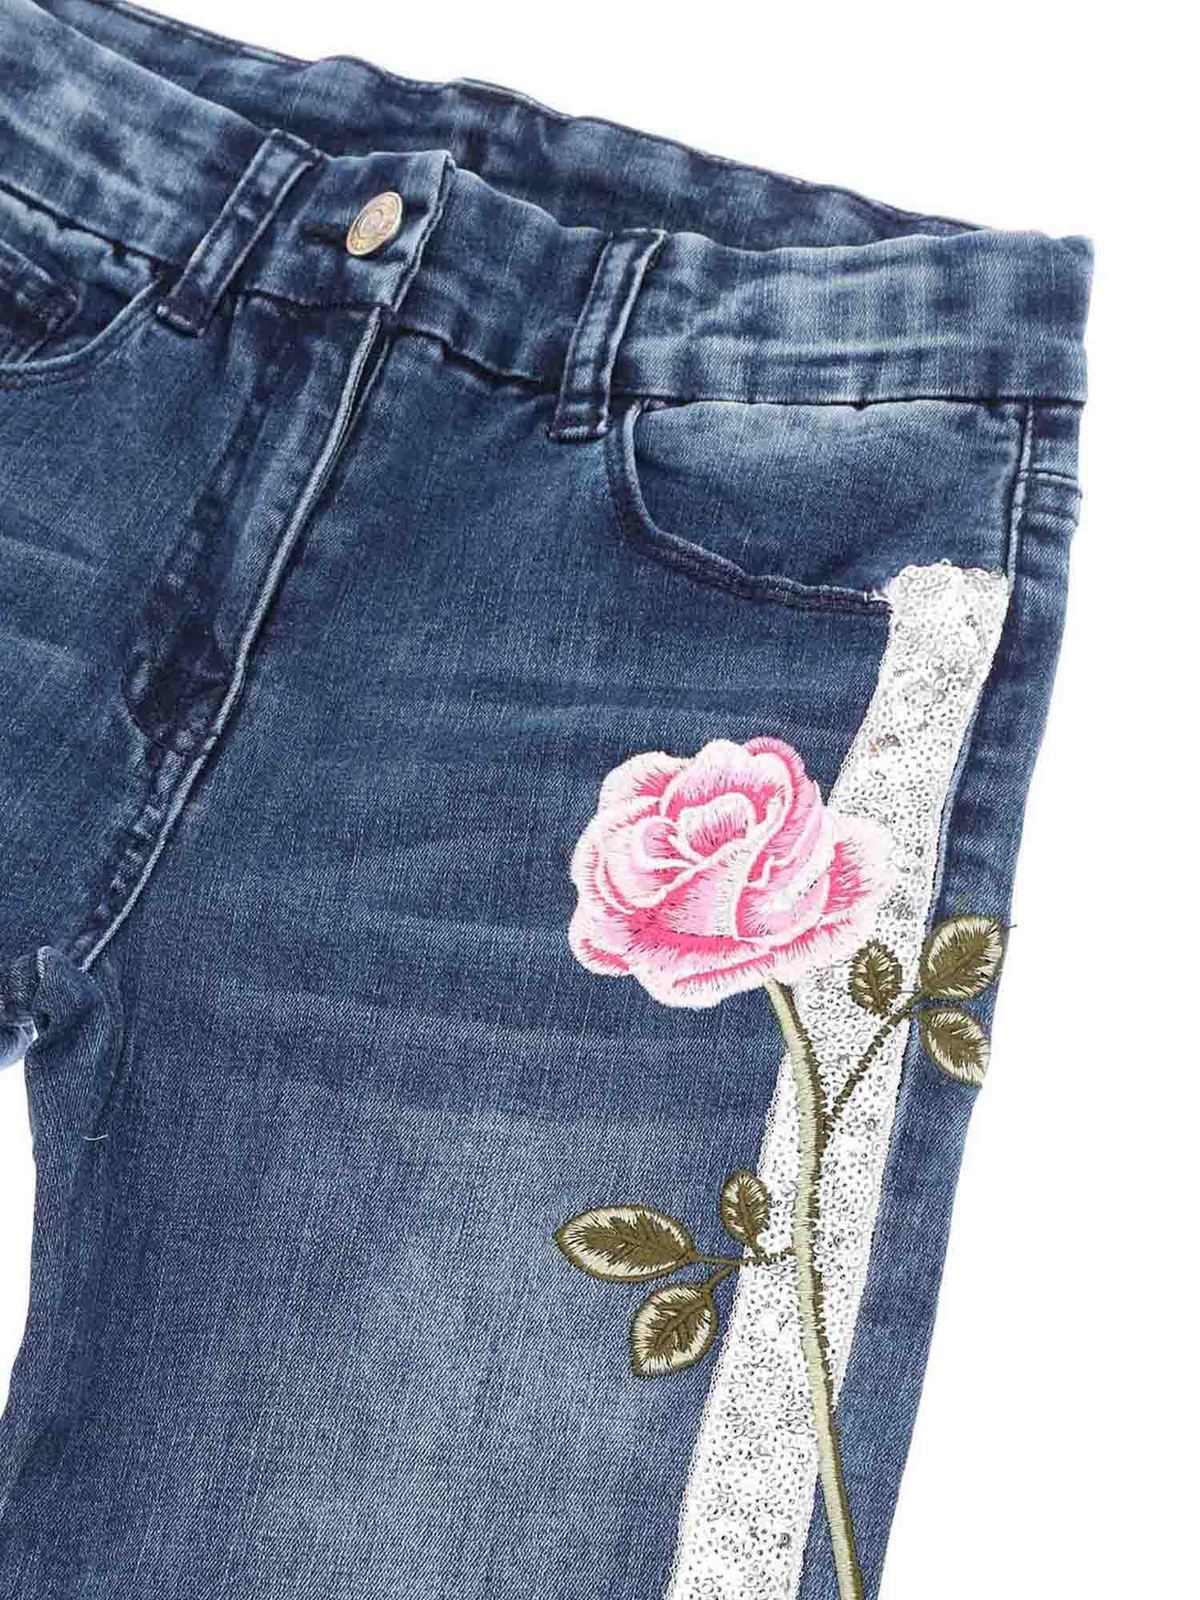 astronomie Zeep Wat is er mis Jeans Monnalisa - Blue jeans with sequins and floral embroidery -  79340030100055